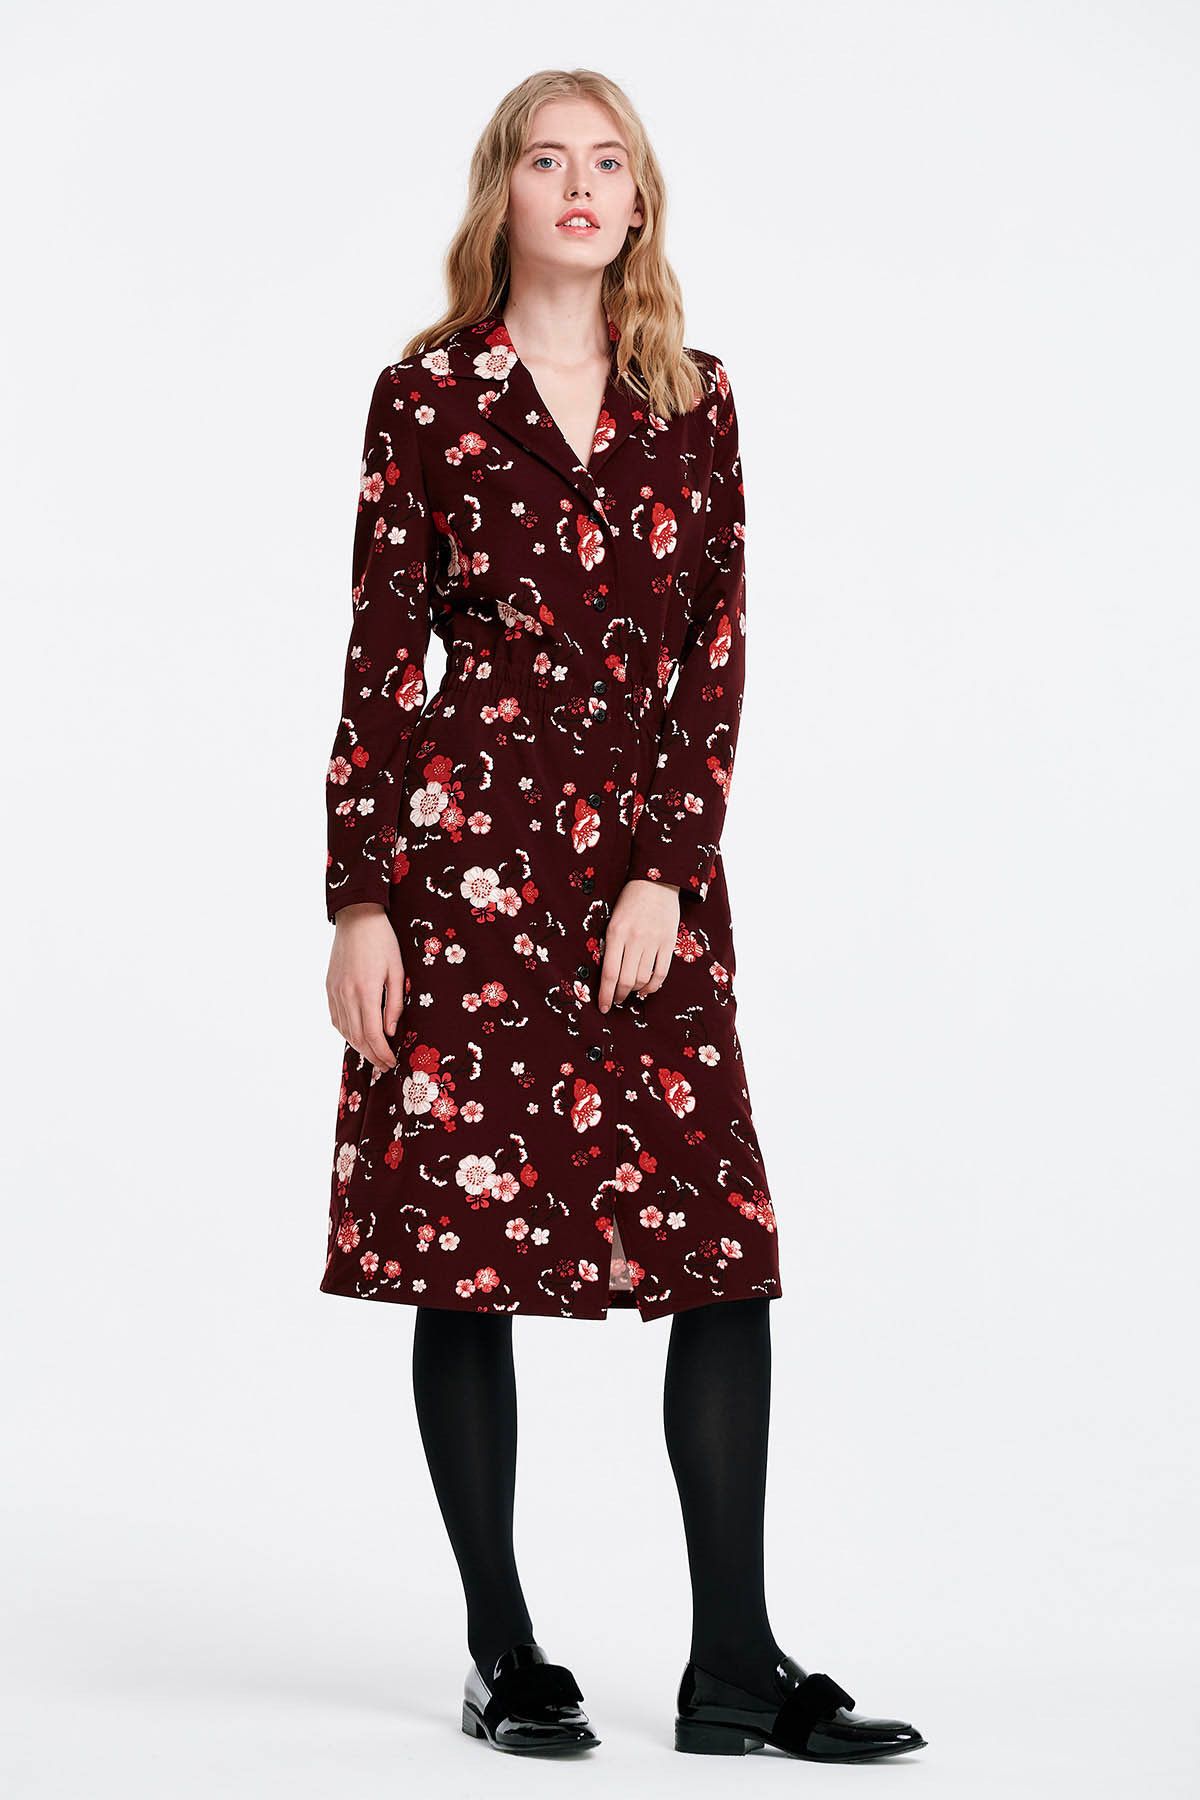 Burgundy dress with a floral print and buttons , photo 5